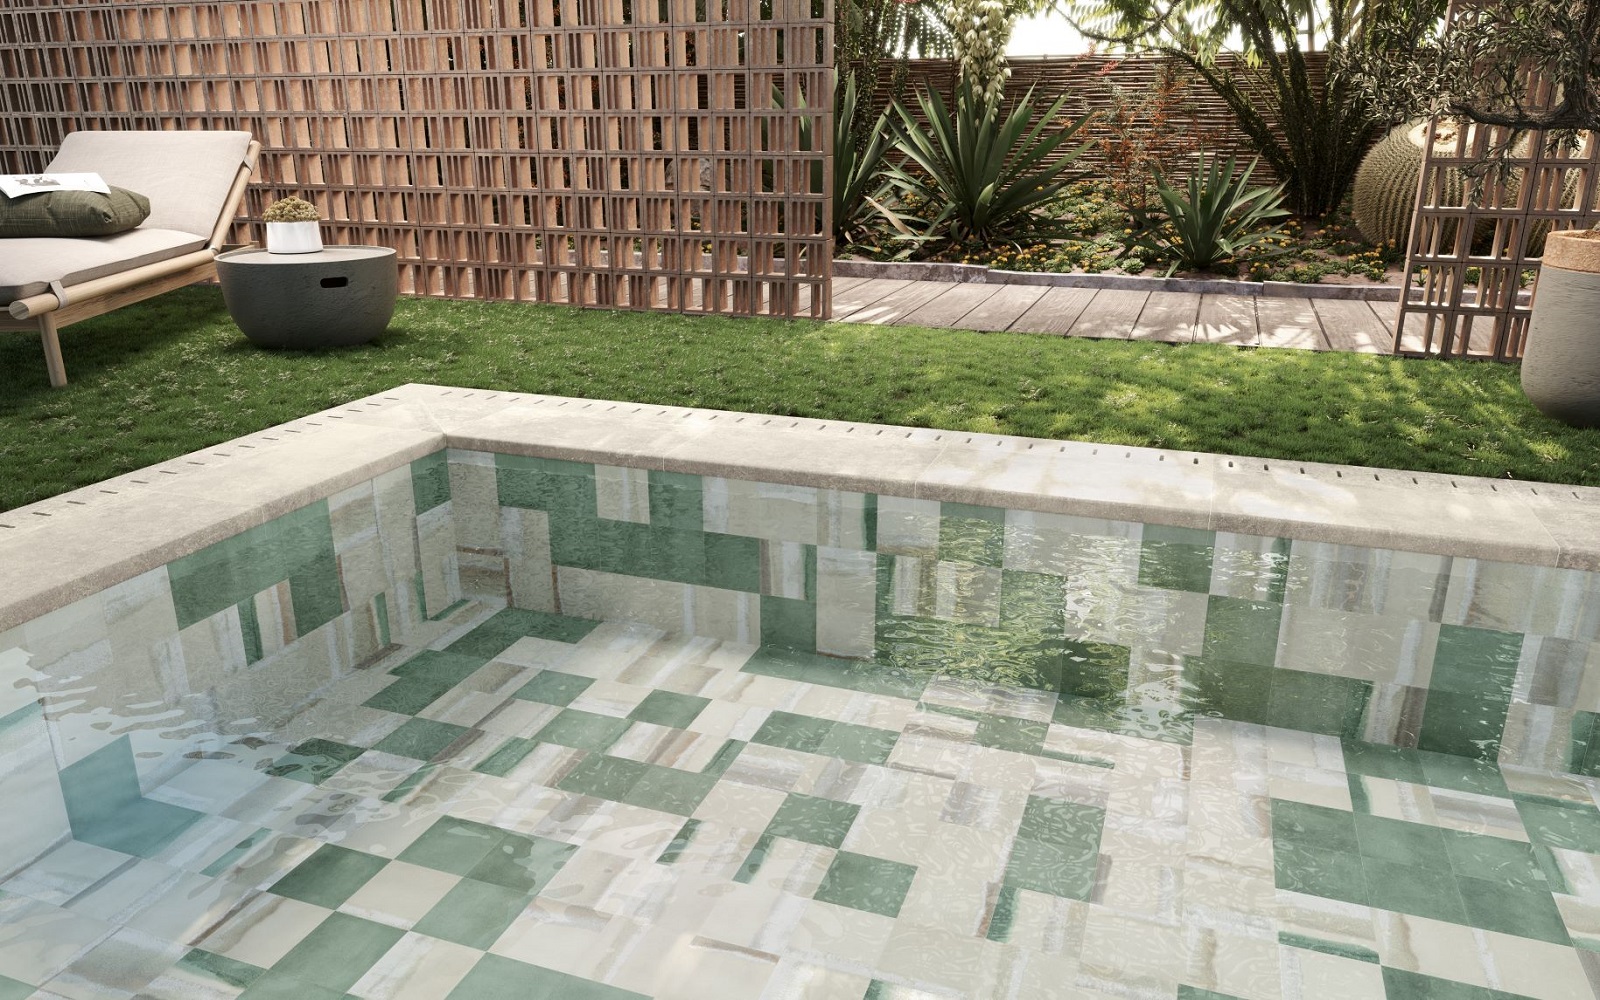 Blurring the boundaries: tiling the great outdoors